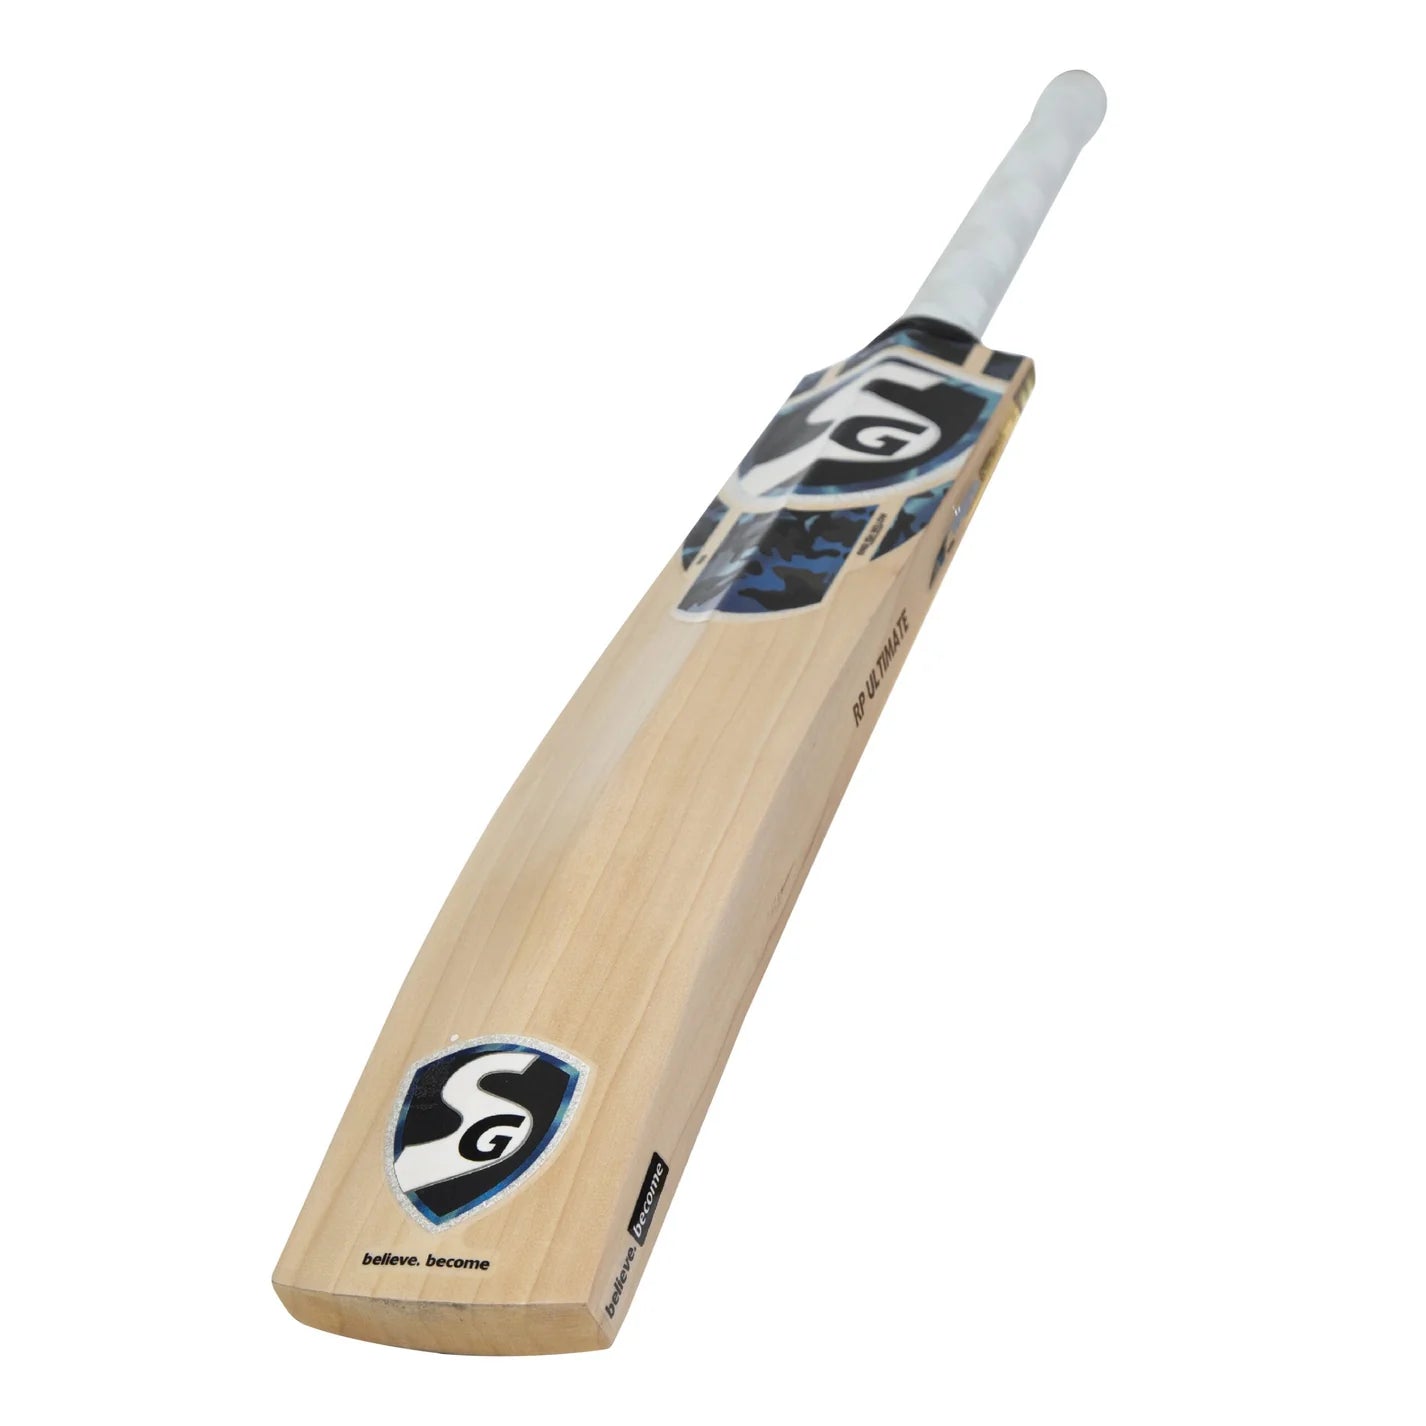 SG RP Ultimate Grade 3 world’s finest English willow traditionally shaped Cricket Bat